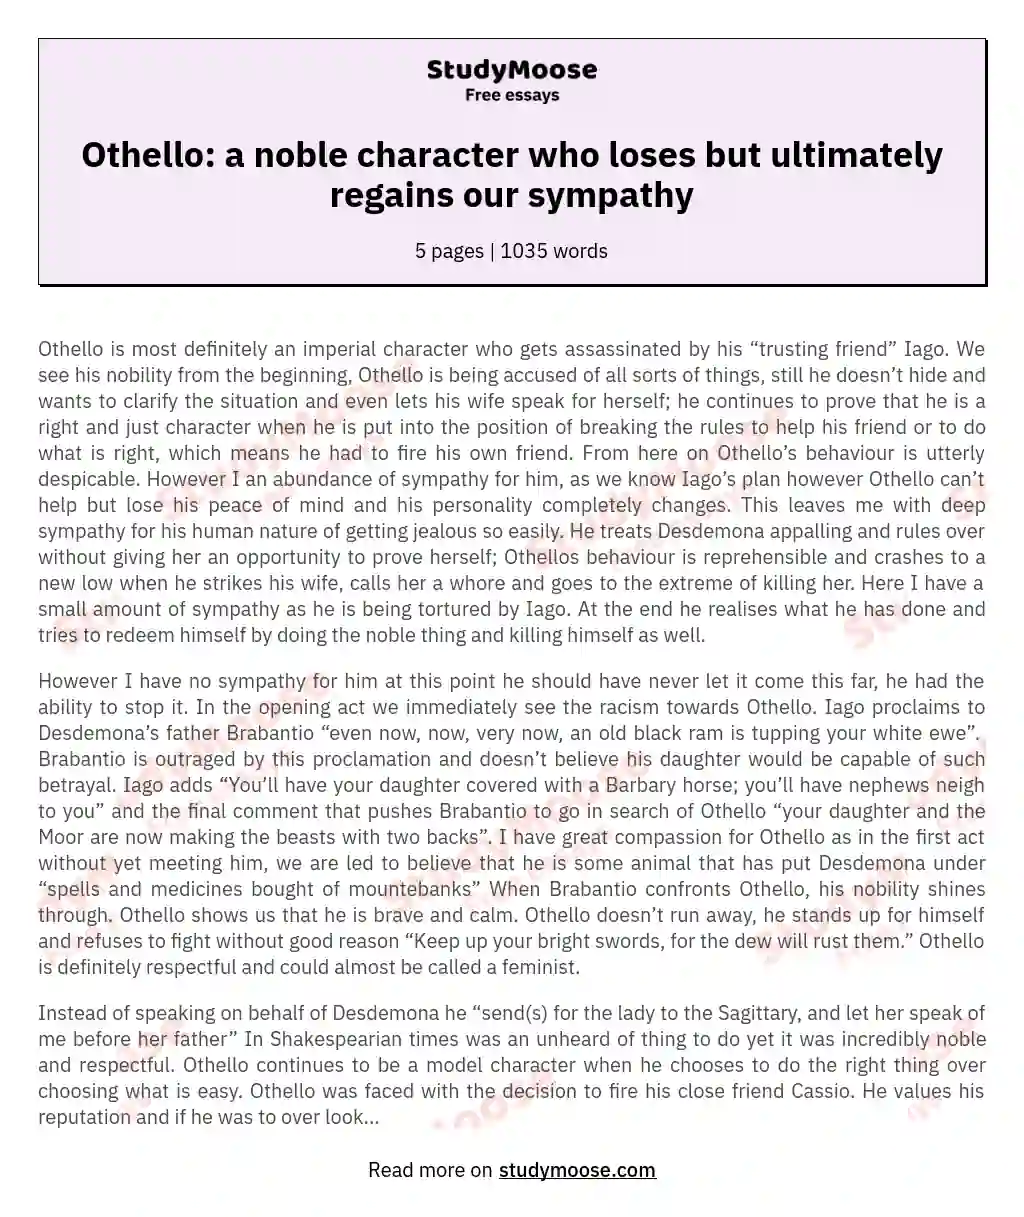 Othello: a noble character who loses but ultimately regains our sympathy